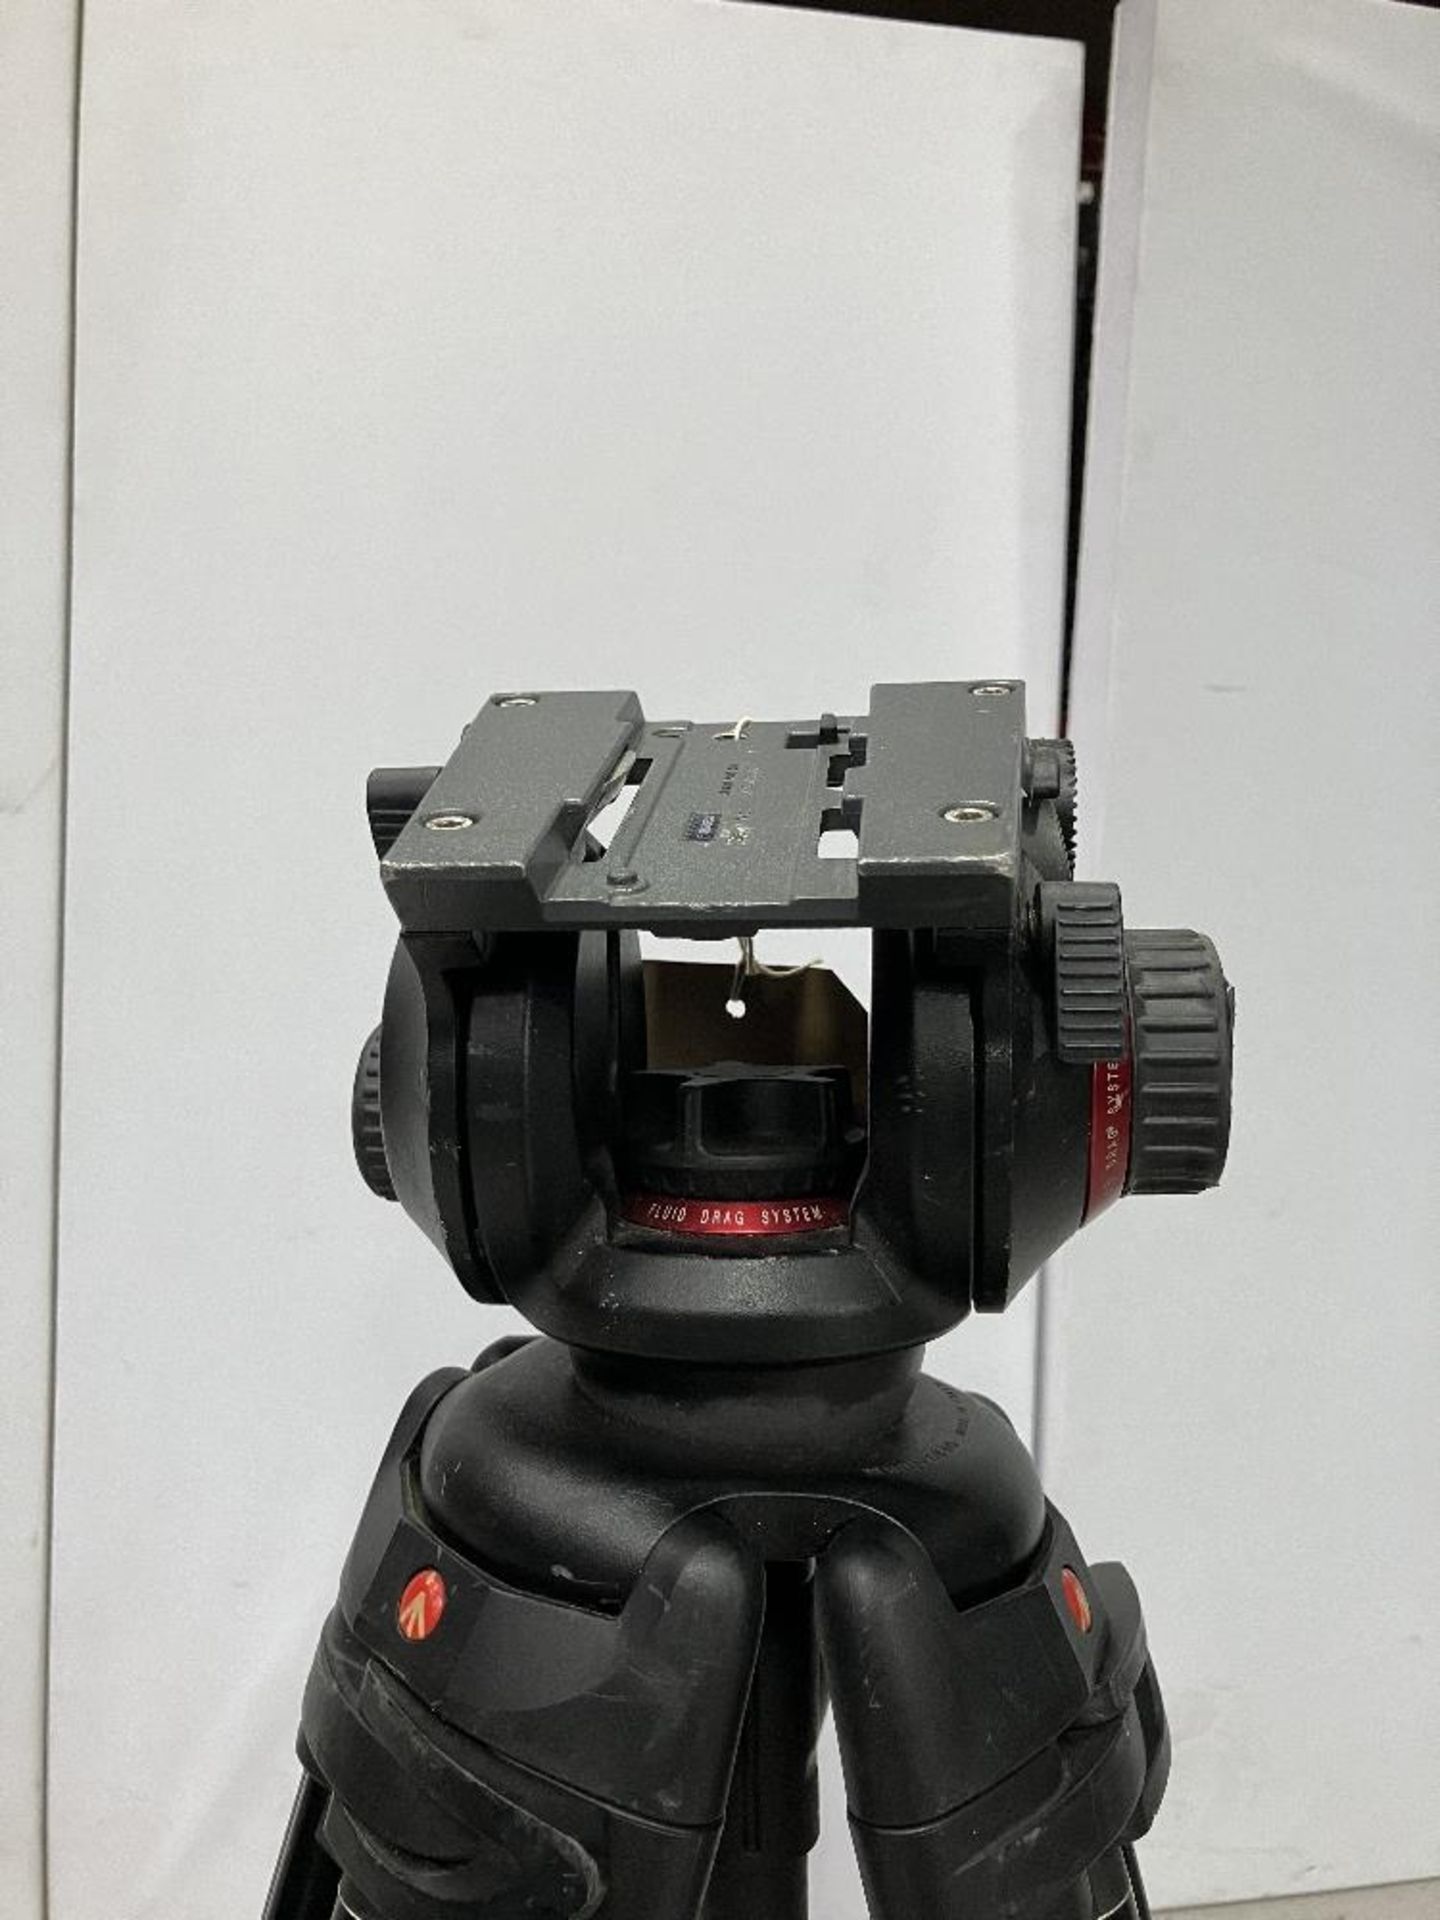 Manfrotto 504HD Tripod Head and 546GB Tripod with Carbon Fibre Legs - Image 2 of 4